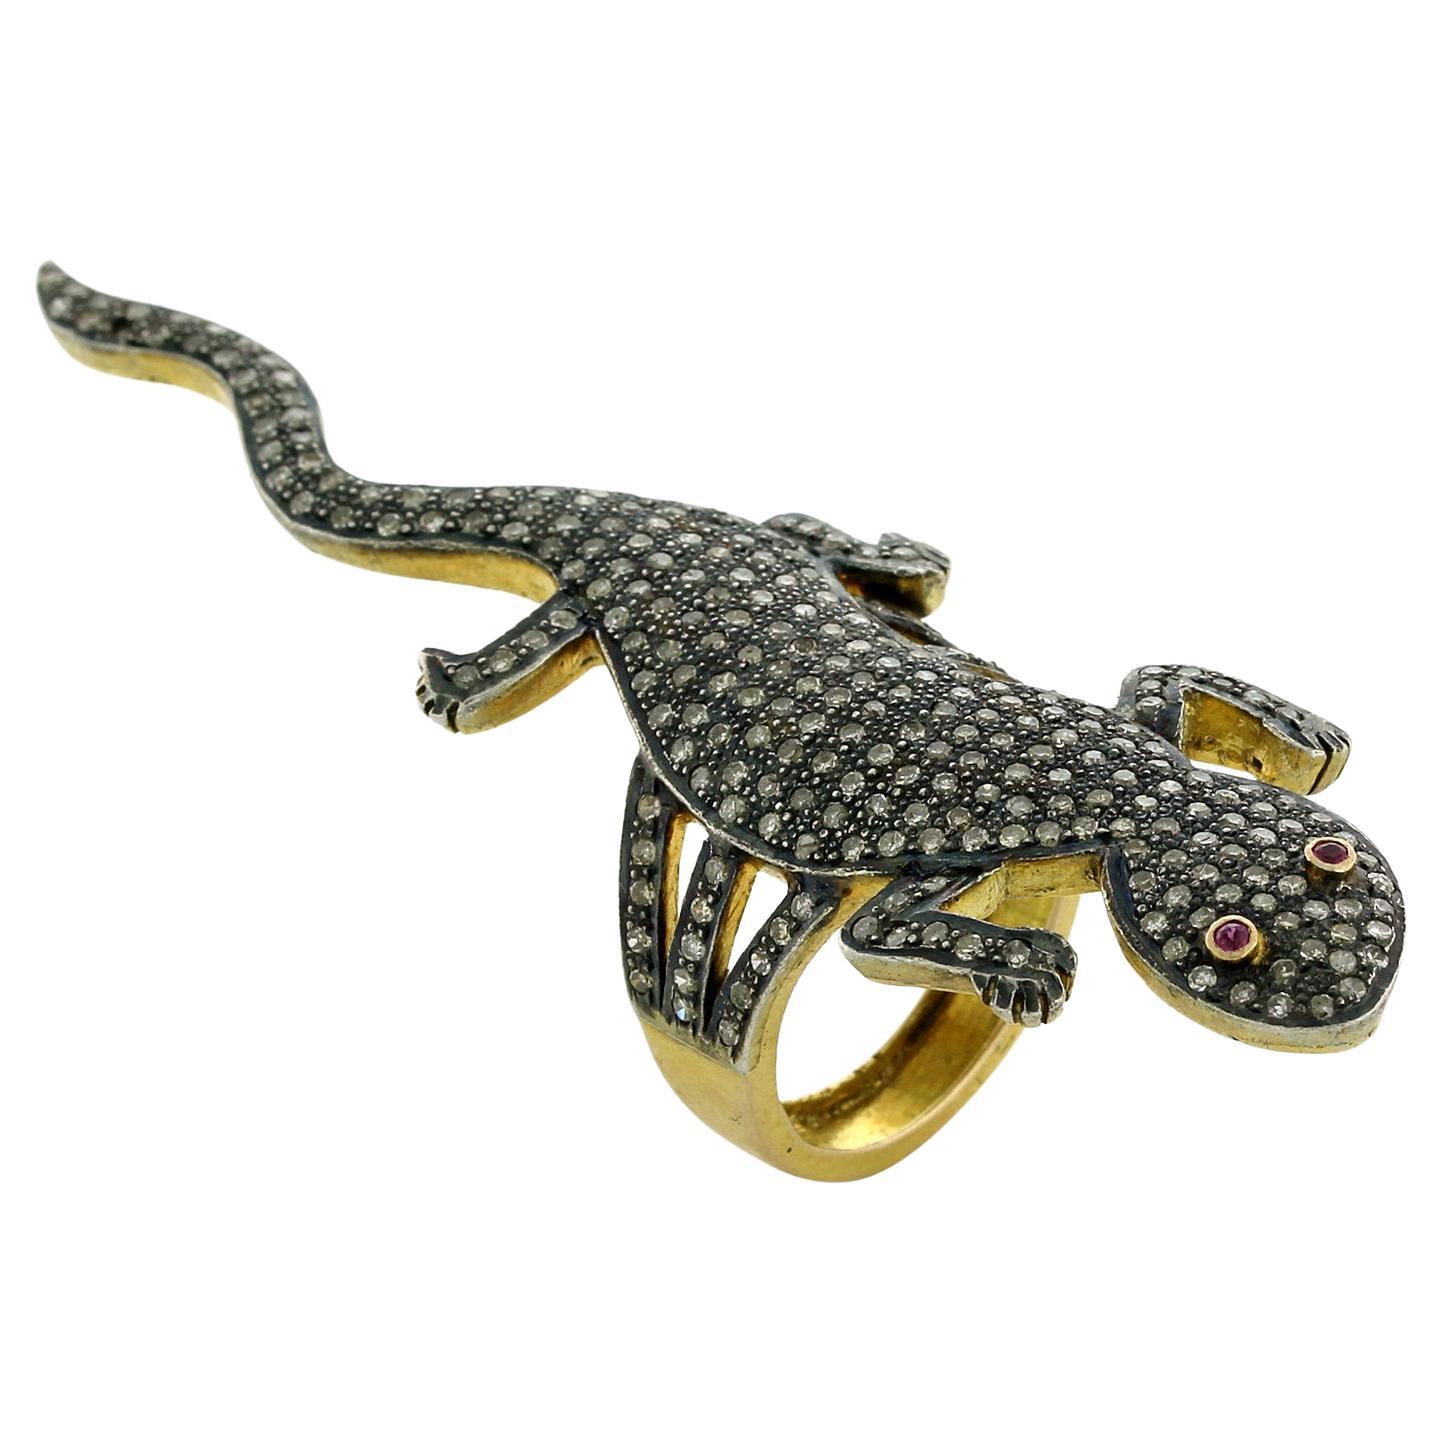 Lizard Shaped Pave Diamond Ring With Ruby Eyes Made In 14k Yellow Gold & Silver For Sale